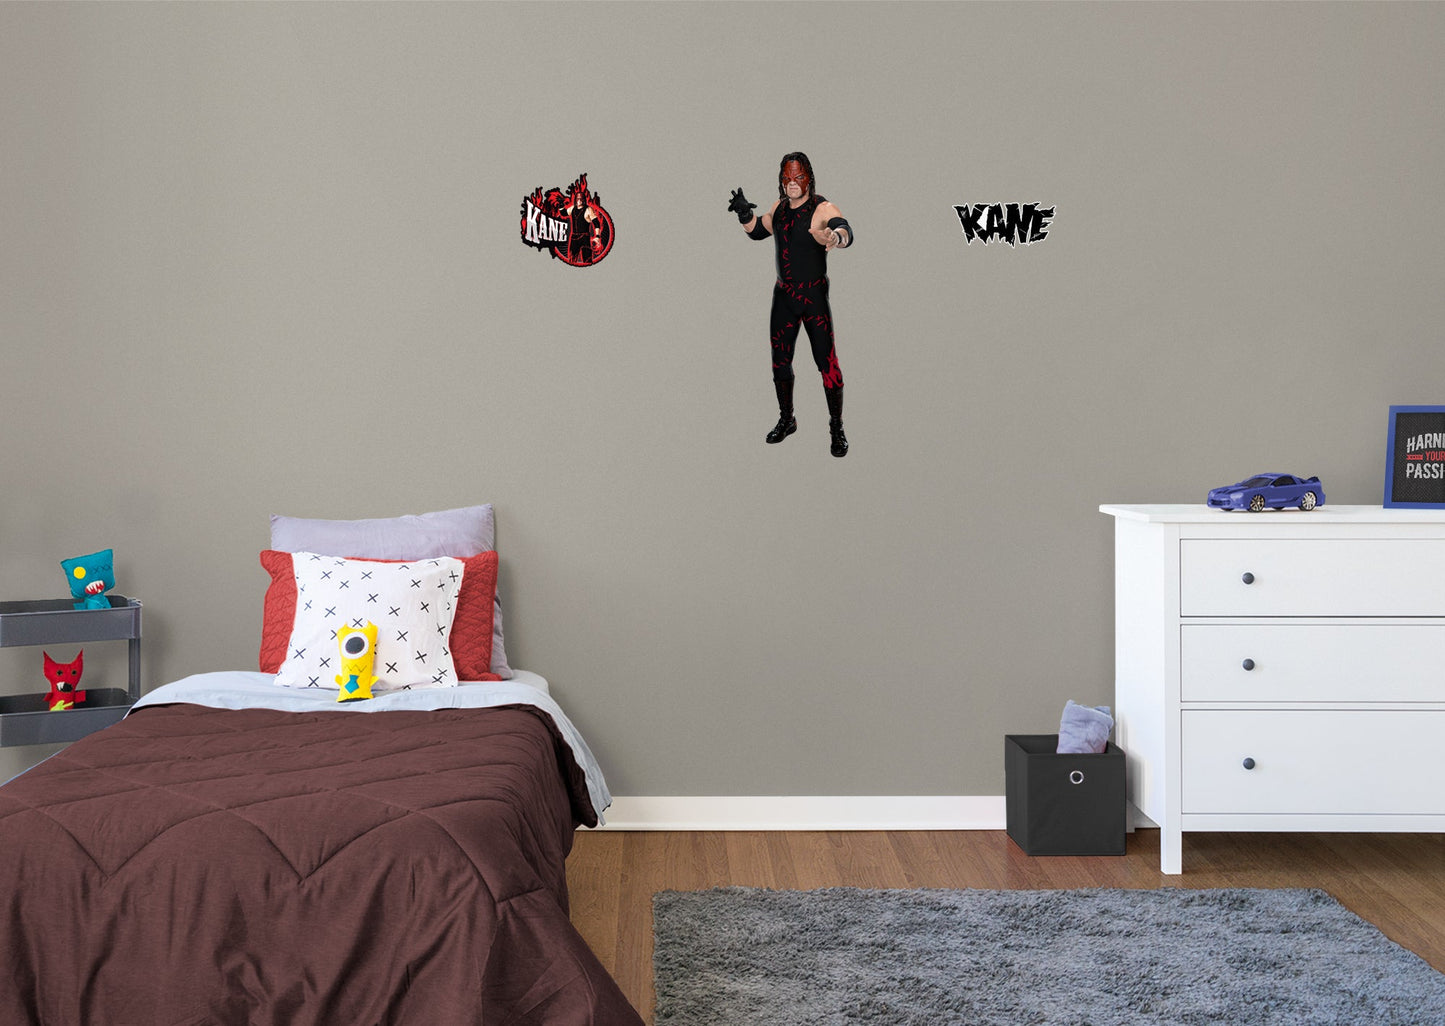 Kane         - Officially Licensed WWE Removable Wall   Adhesive Decal